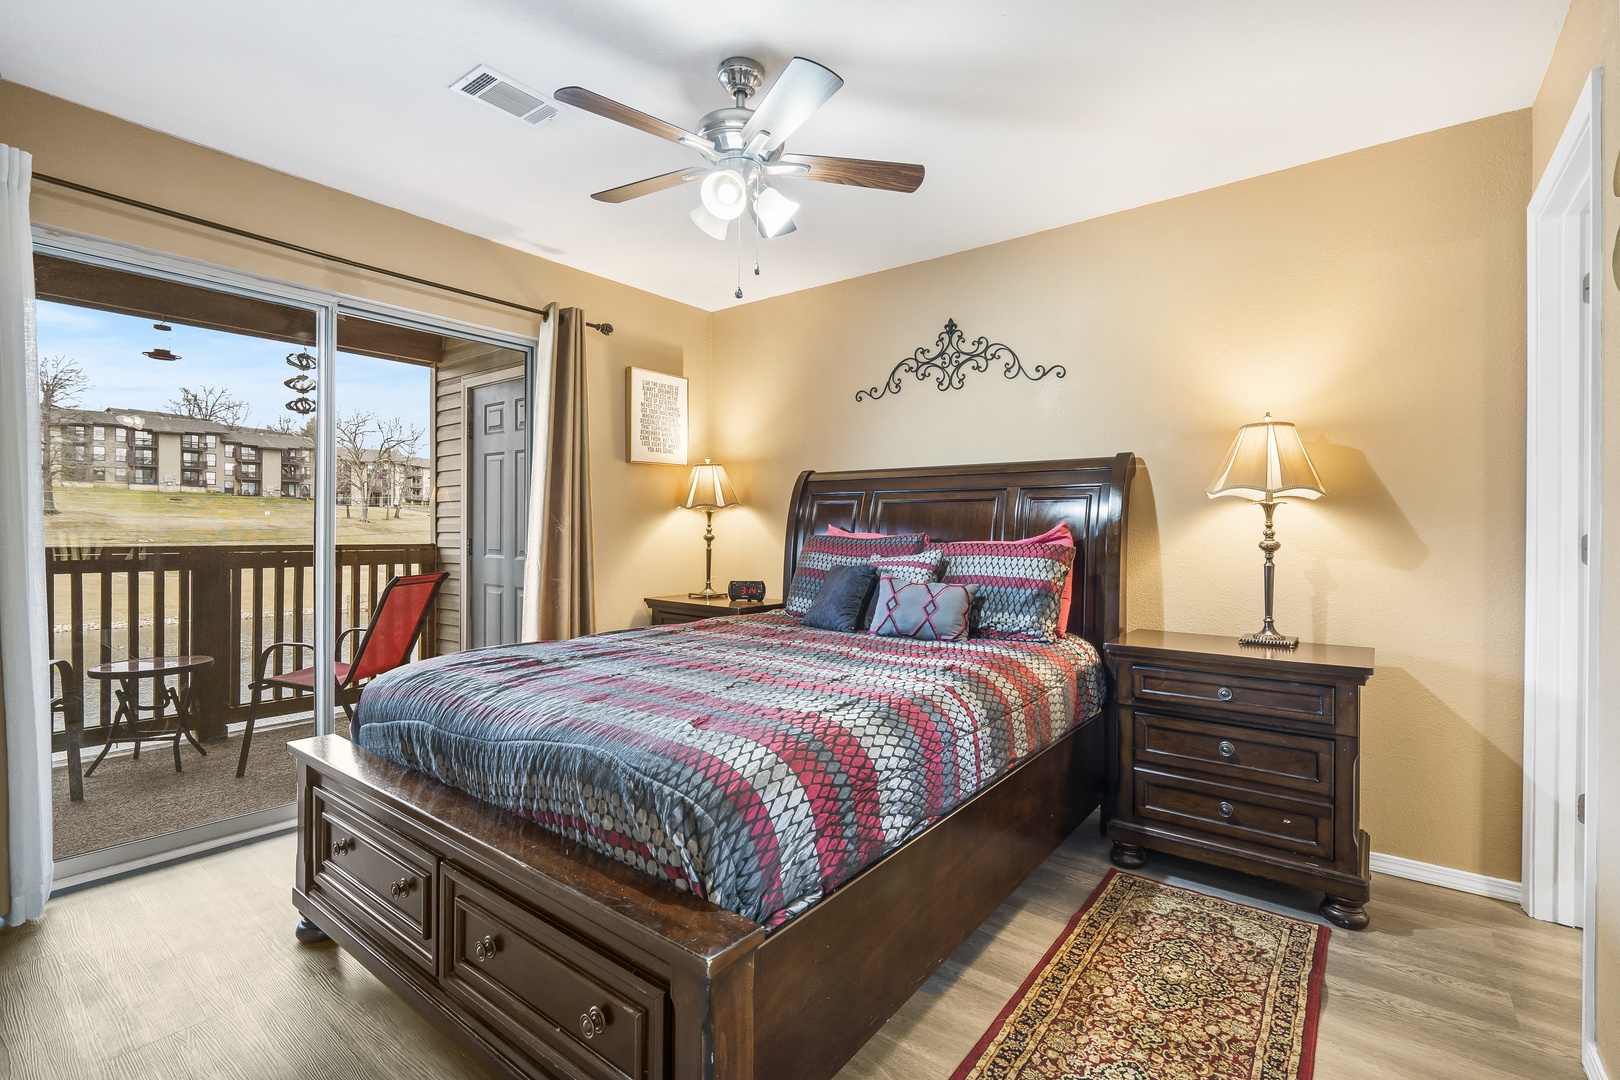 The master queen suite boasts a private ensuite, Smart TV, & deck access